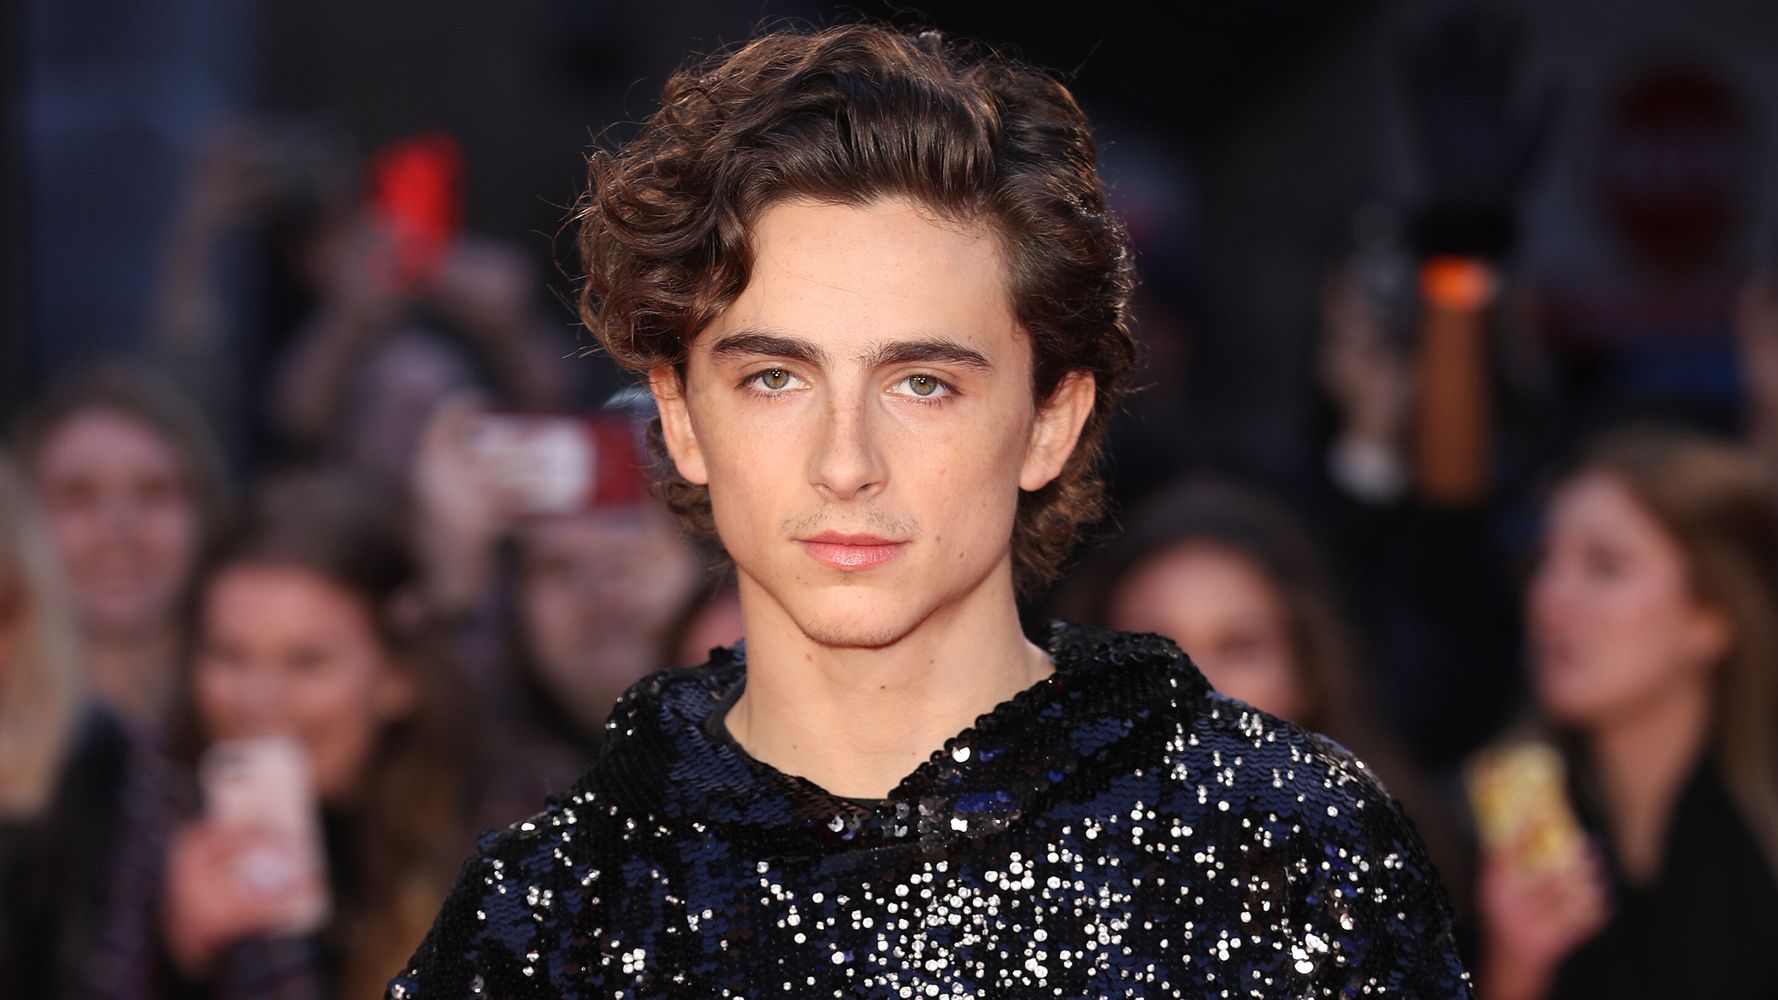 Style,Timothee Chalamet,Louis Vuitton,The King. 